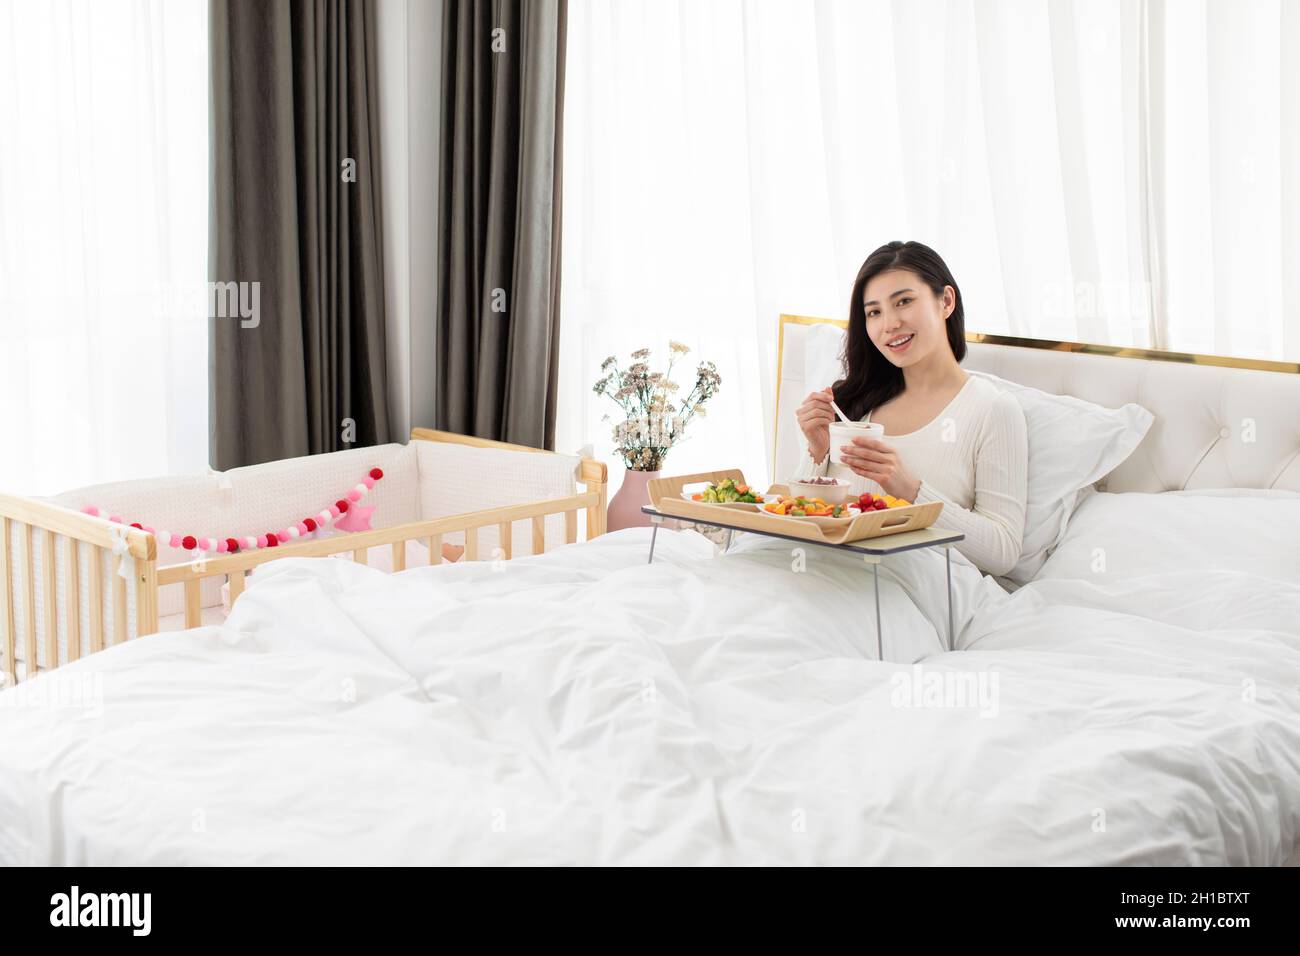 Happy young mother having meal on bed Stock Photo